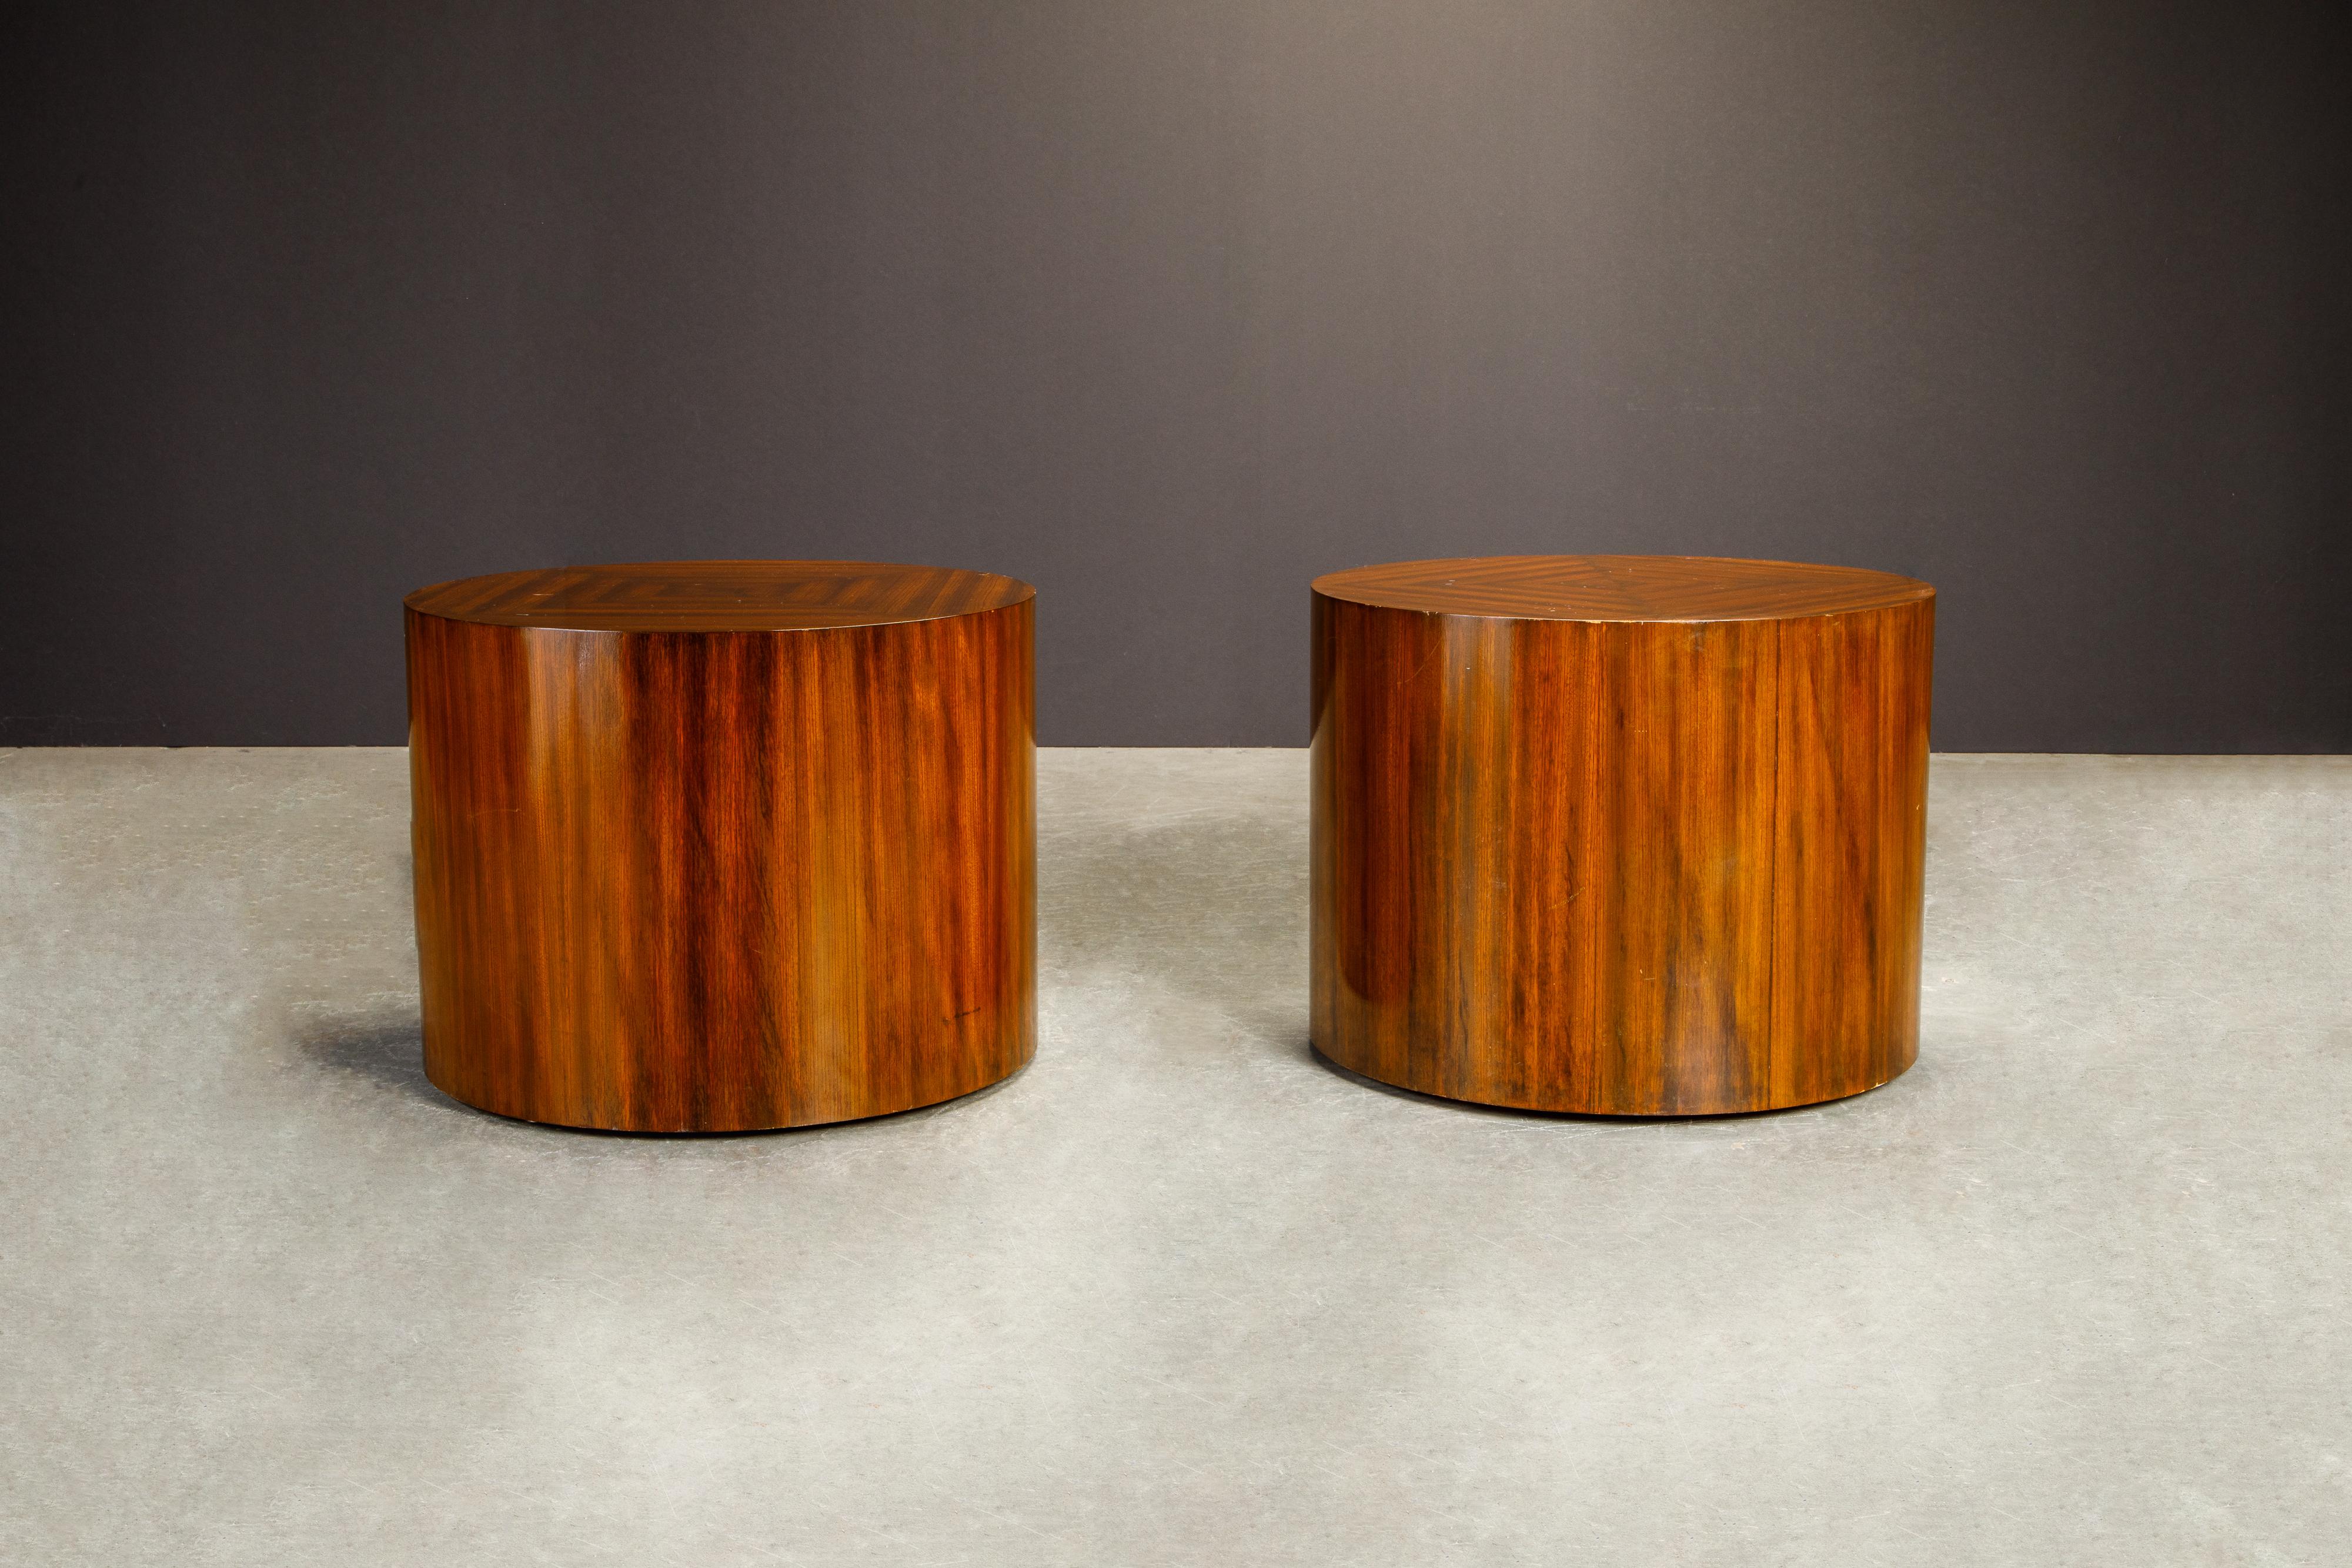 American Pair of Mid-Century Modern Drum Form Wood Side Tables / Pedestals, circa 1970s